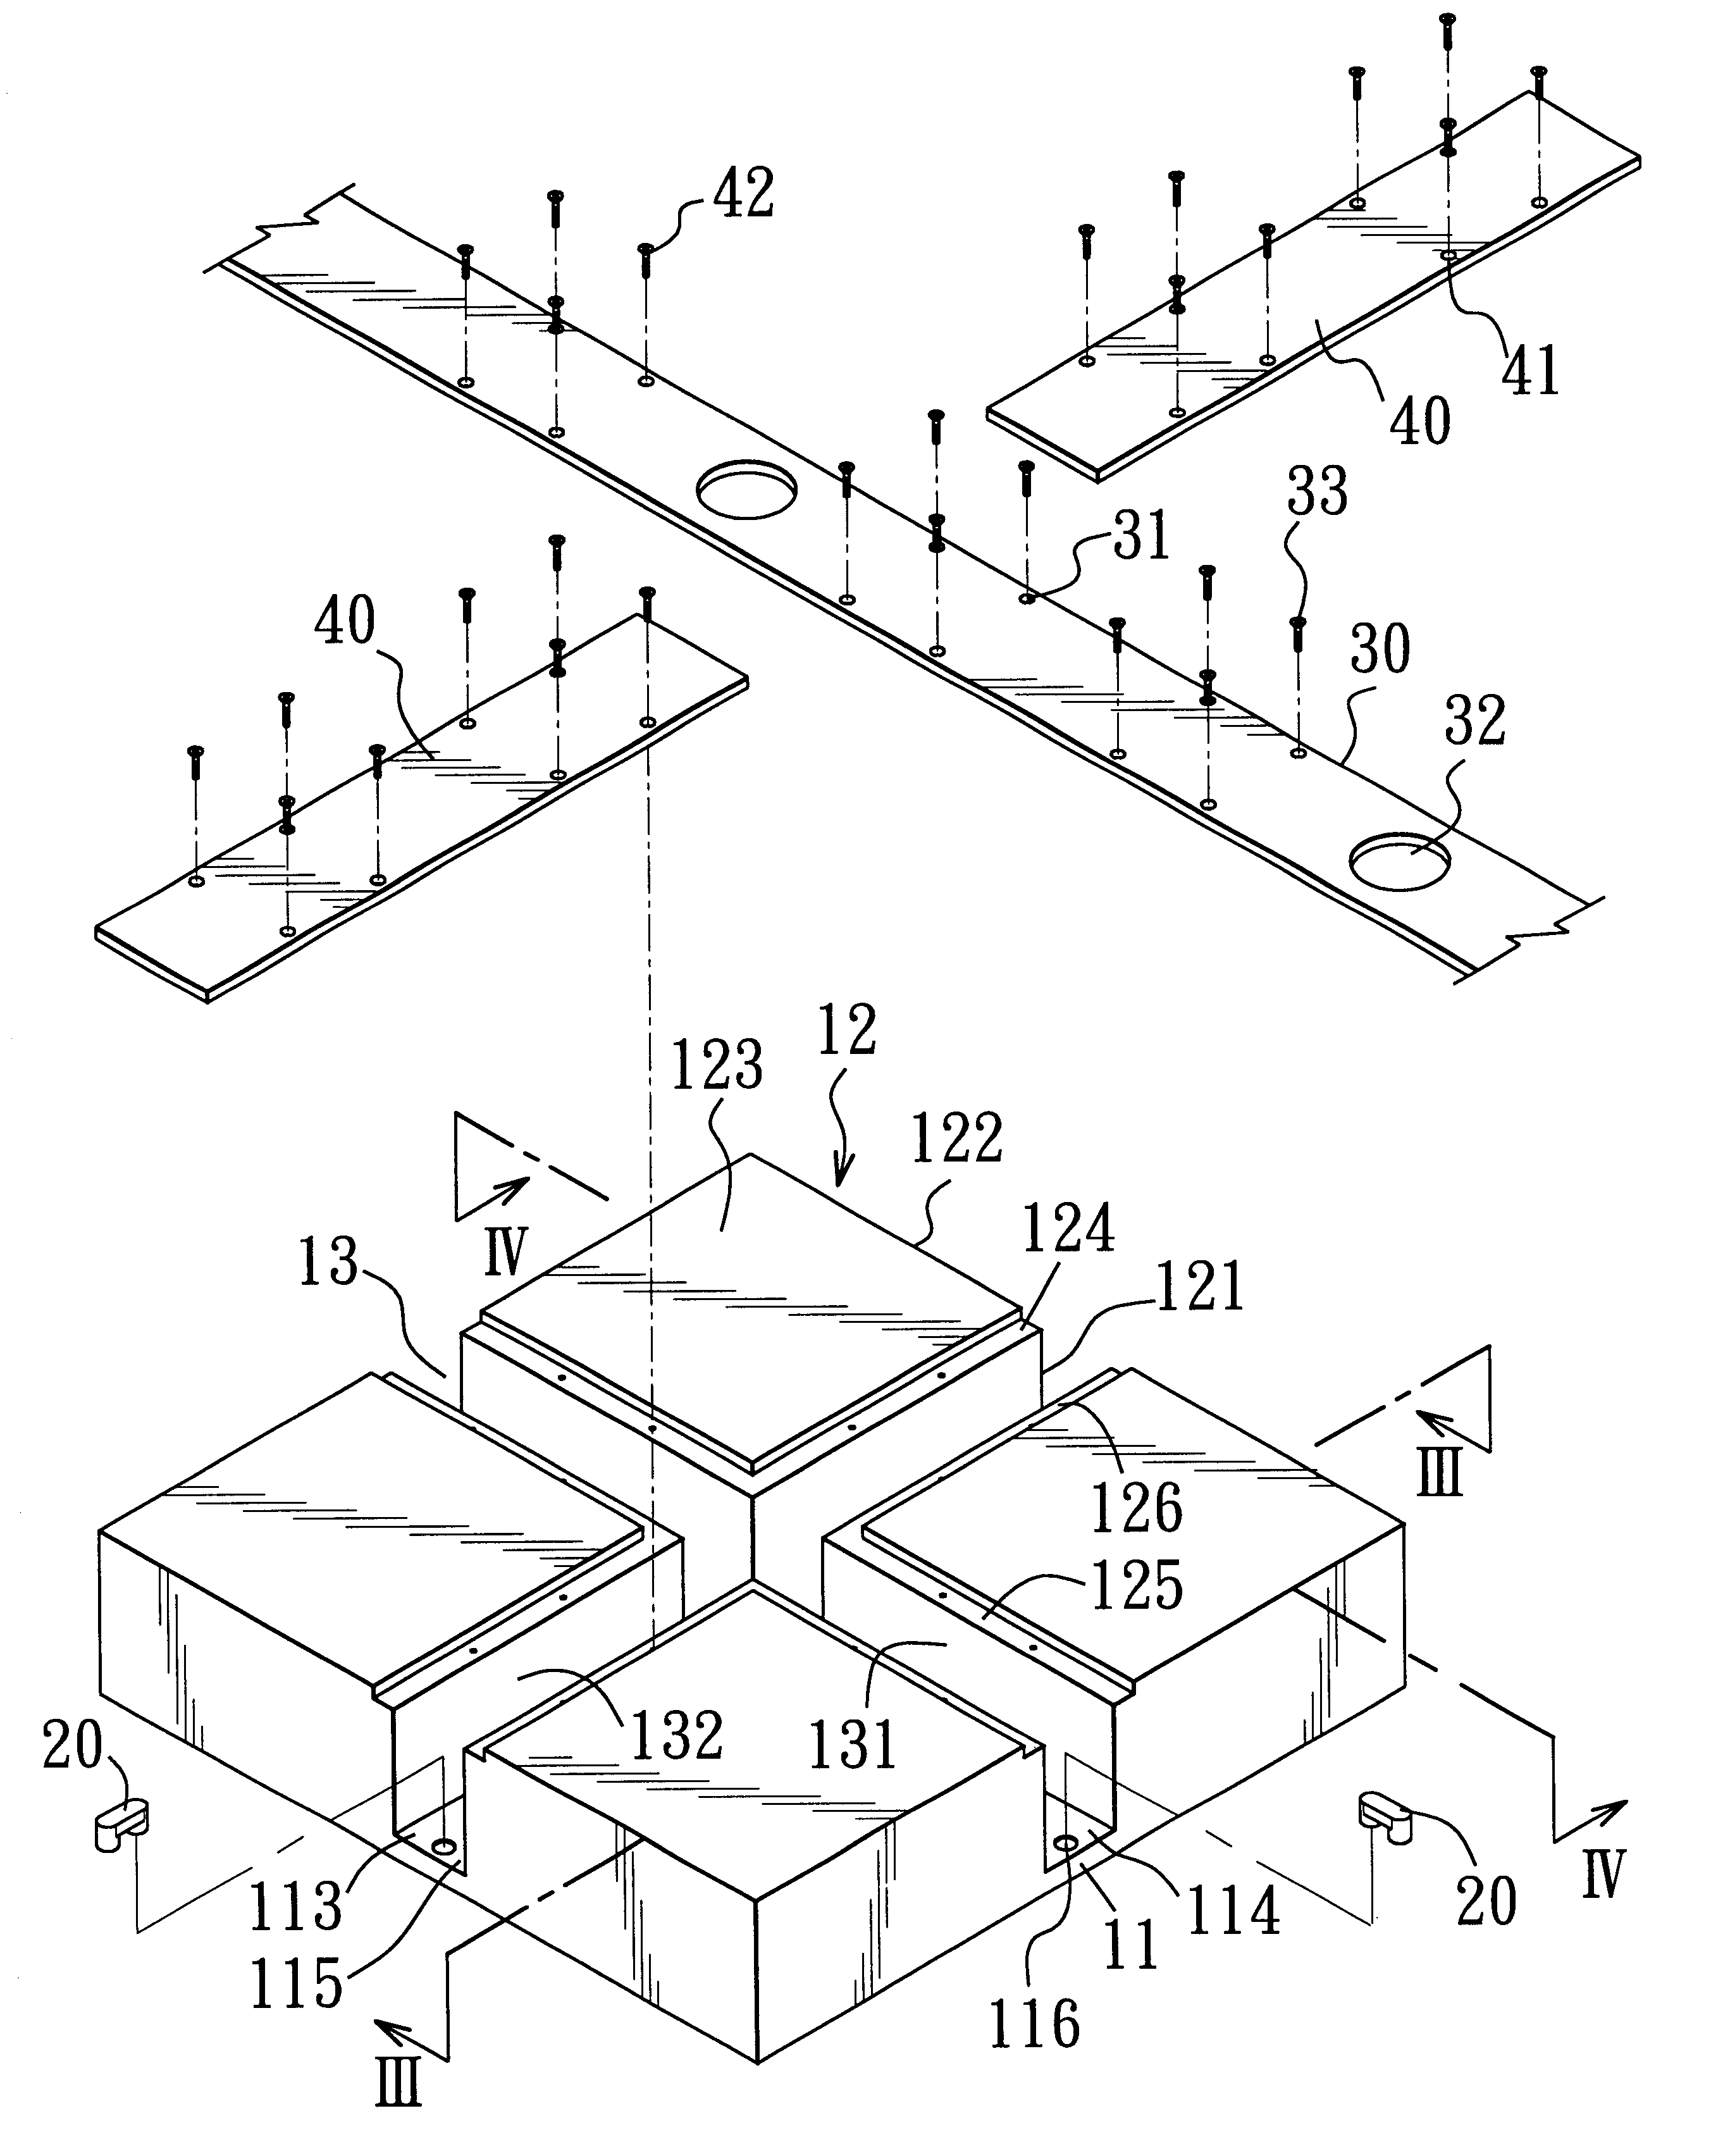 Modular raised floor system with cable-receiving groove network